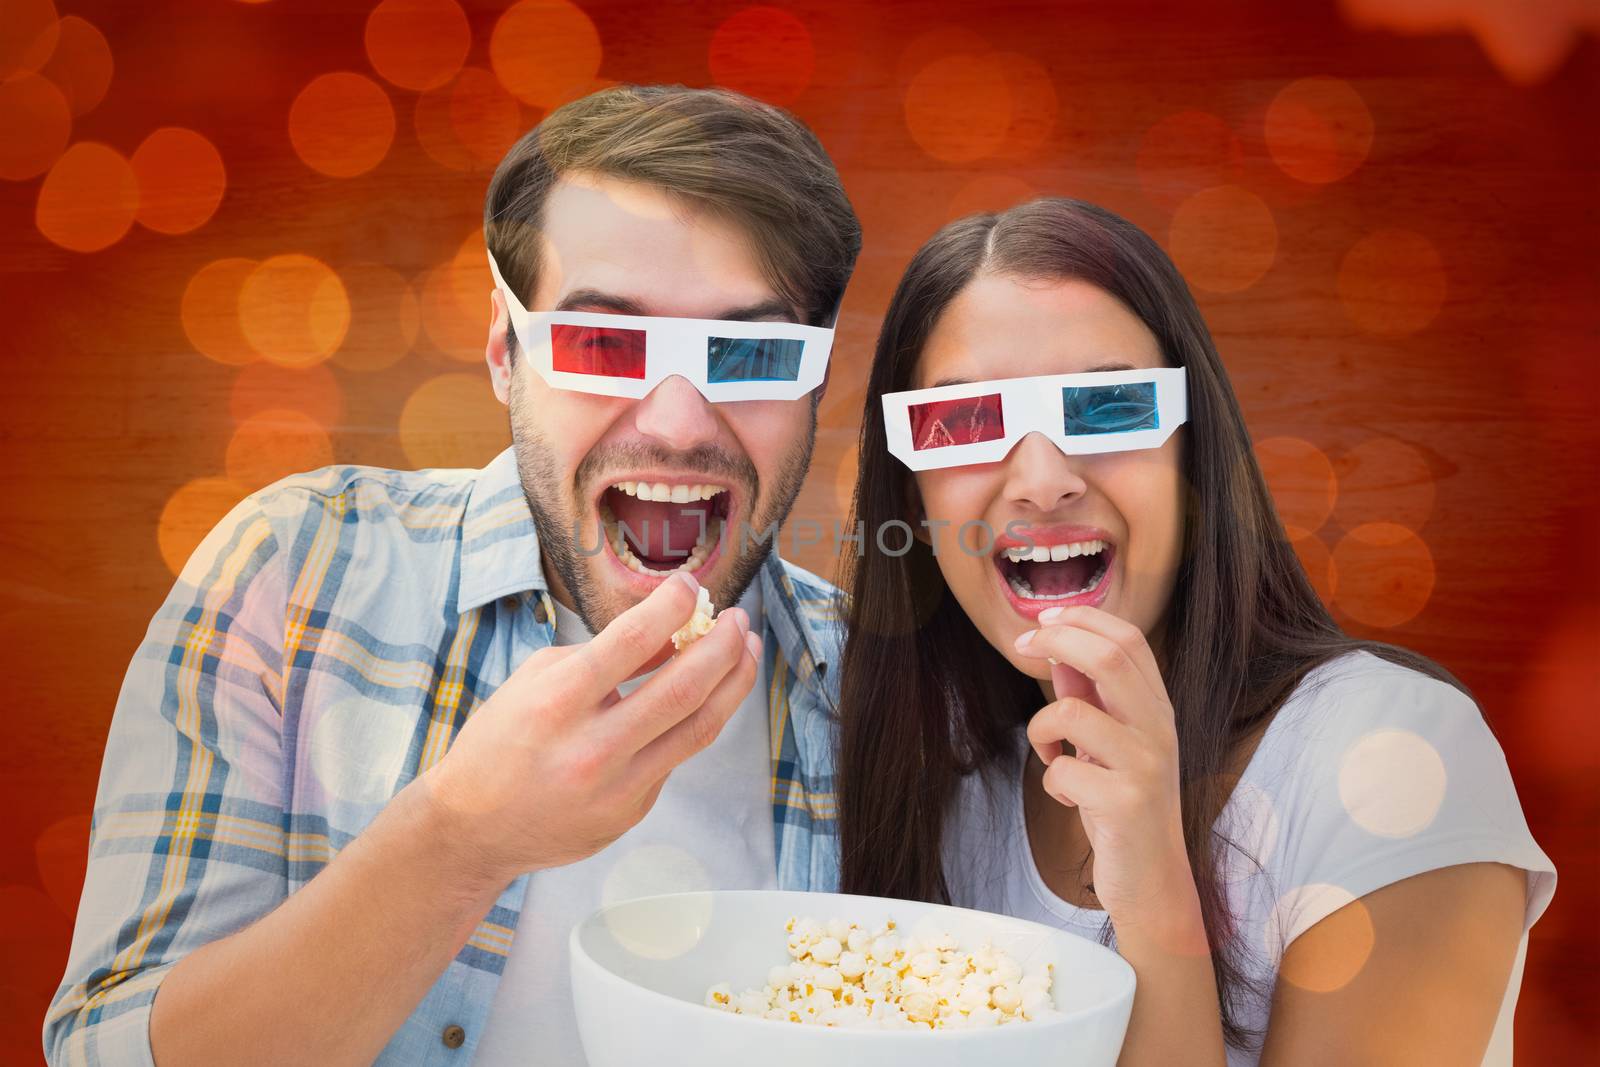 Attractive young couple watching a 3d movie against close up of christmas lights